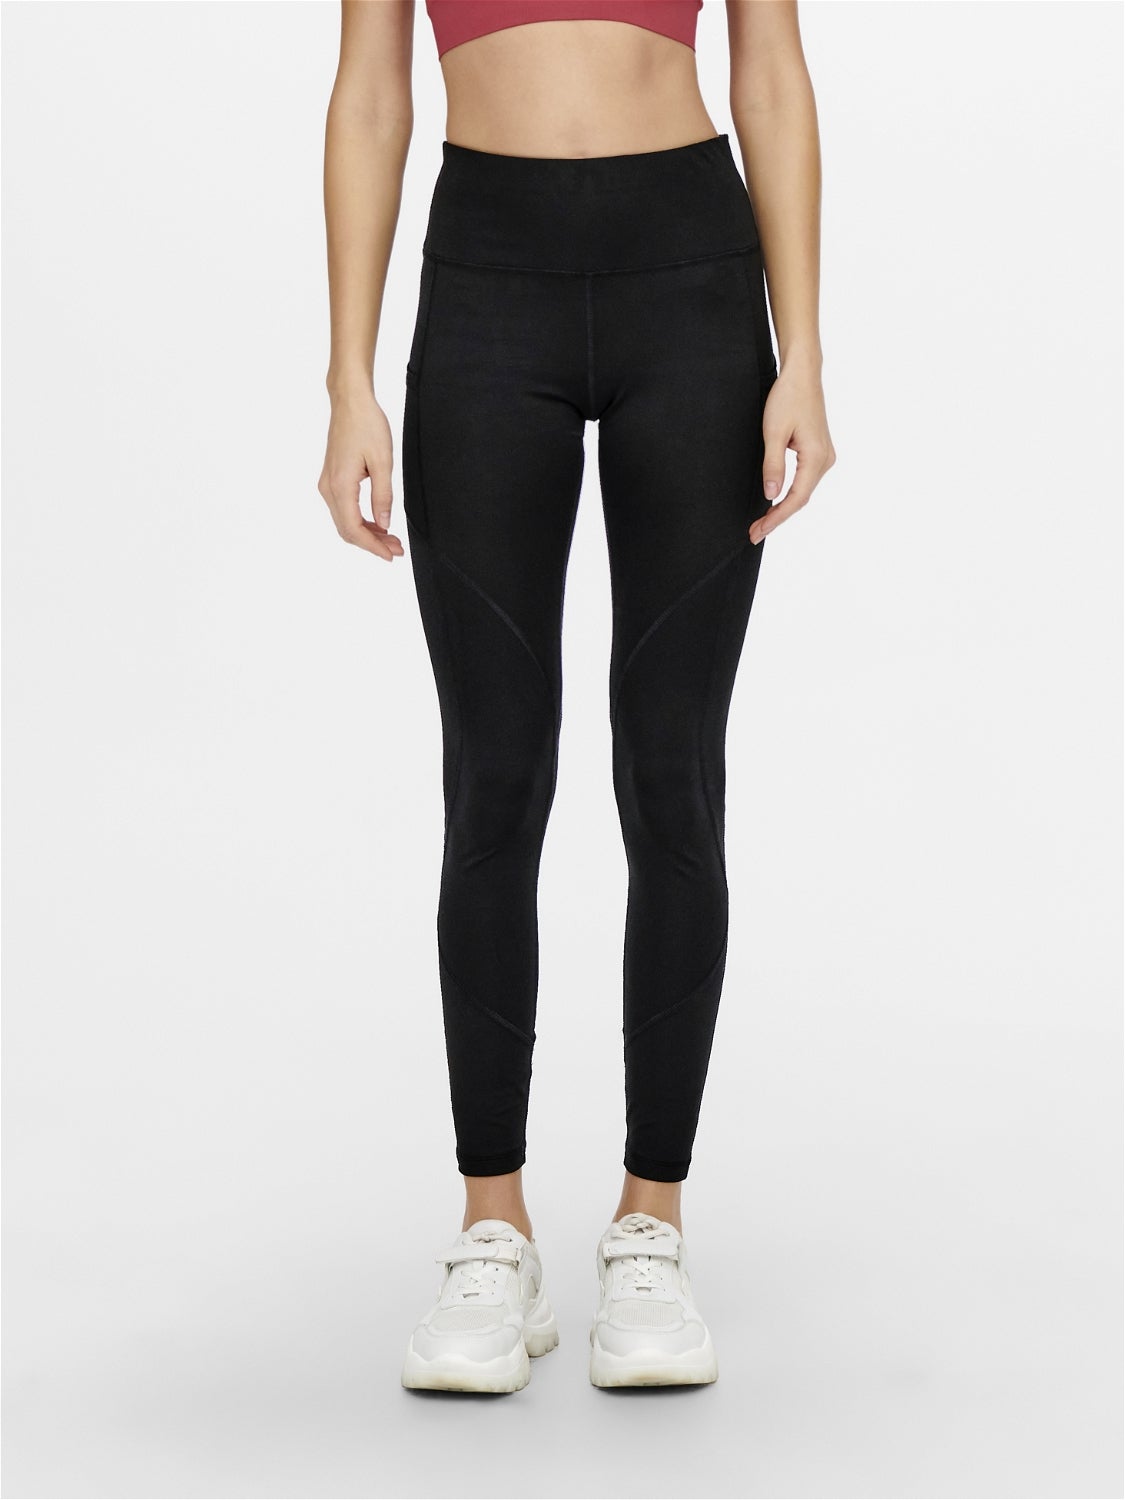 c9 by champion Jacquard Athletic Leggings for Women